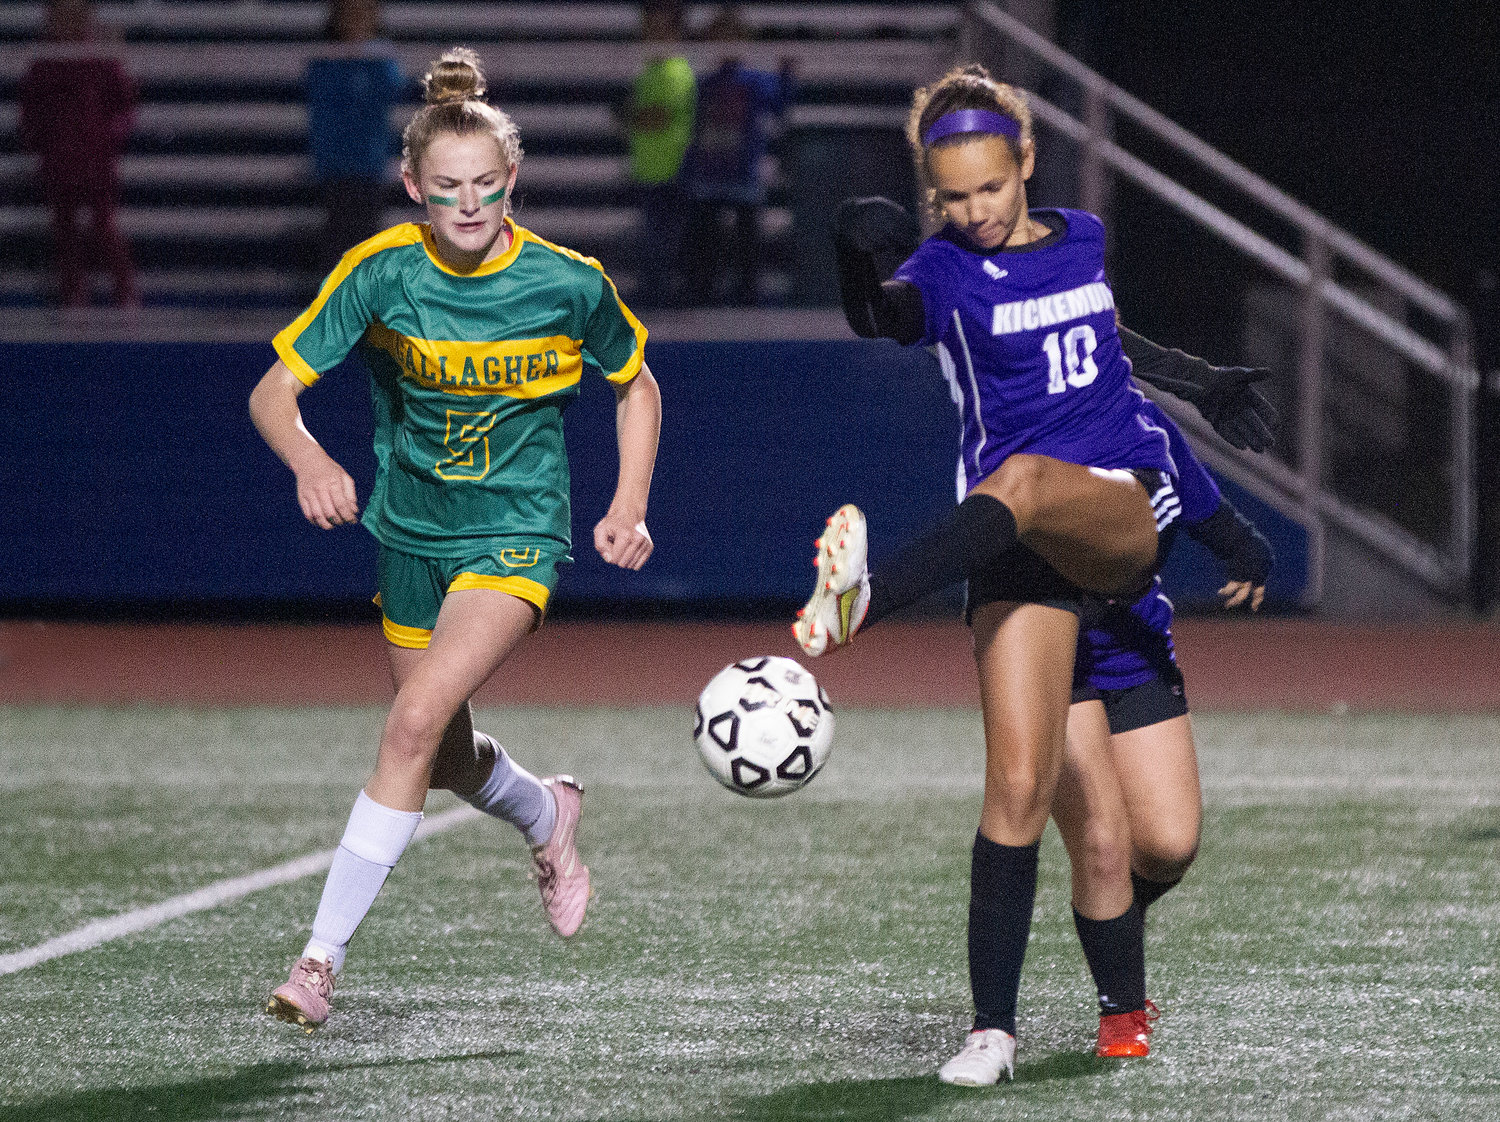 Thalia Adkins boots the ball upfield to thwart a Gallagher attack.